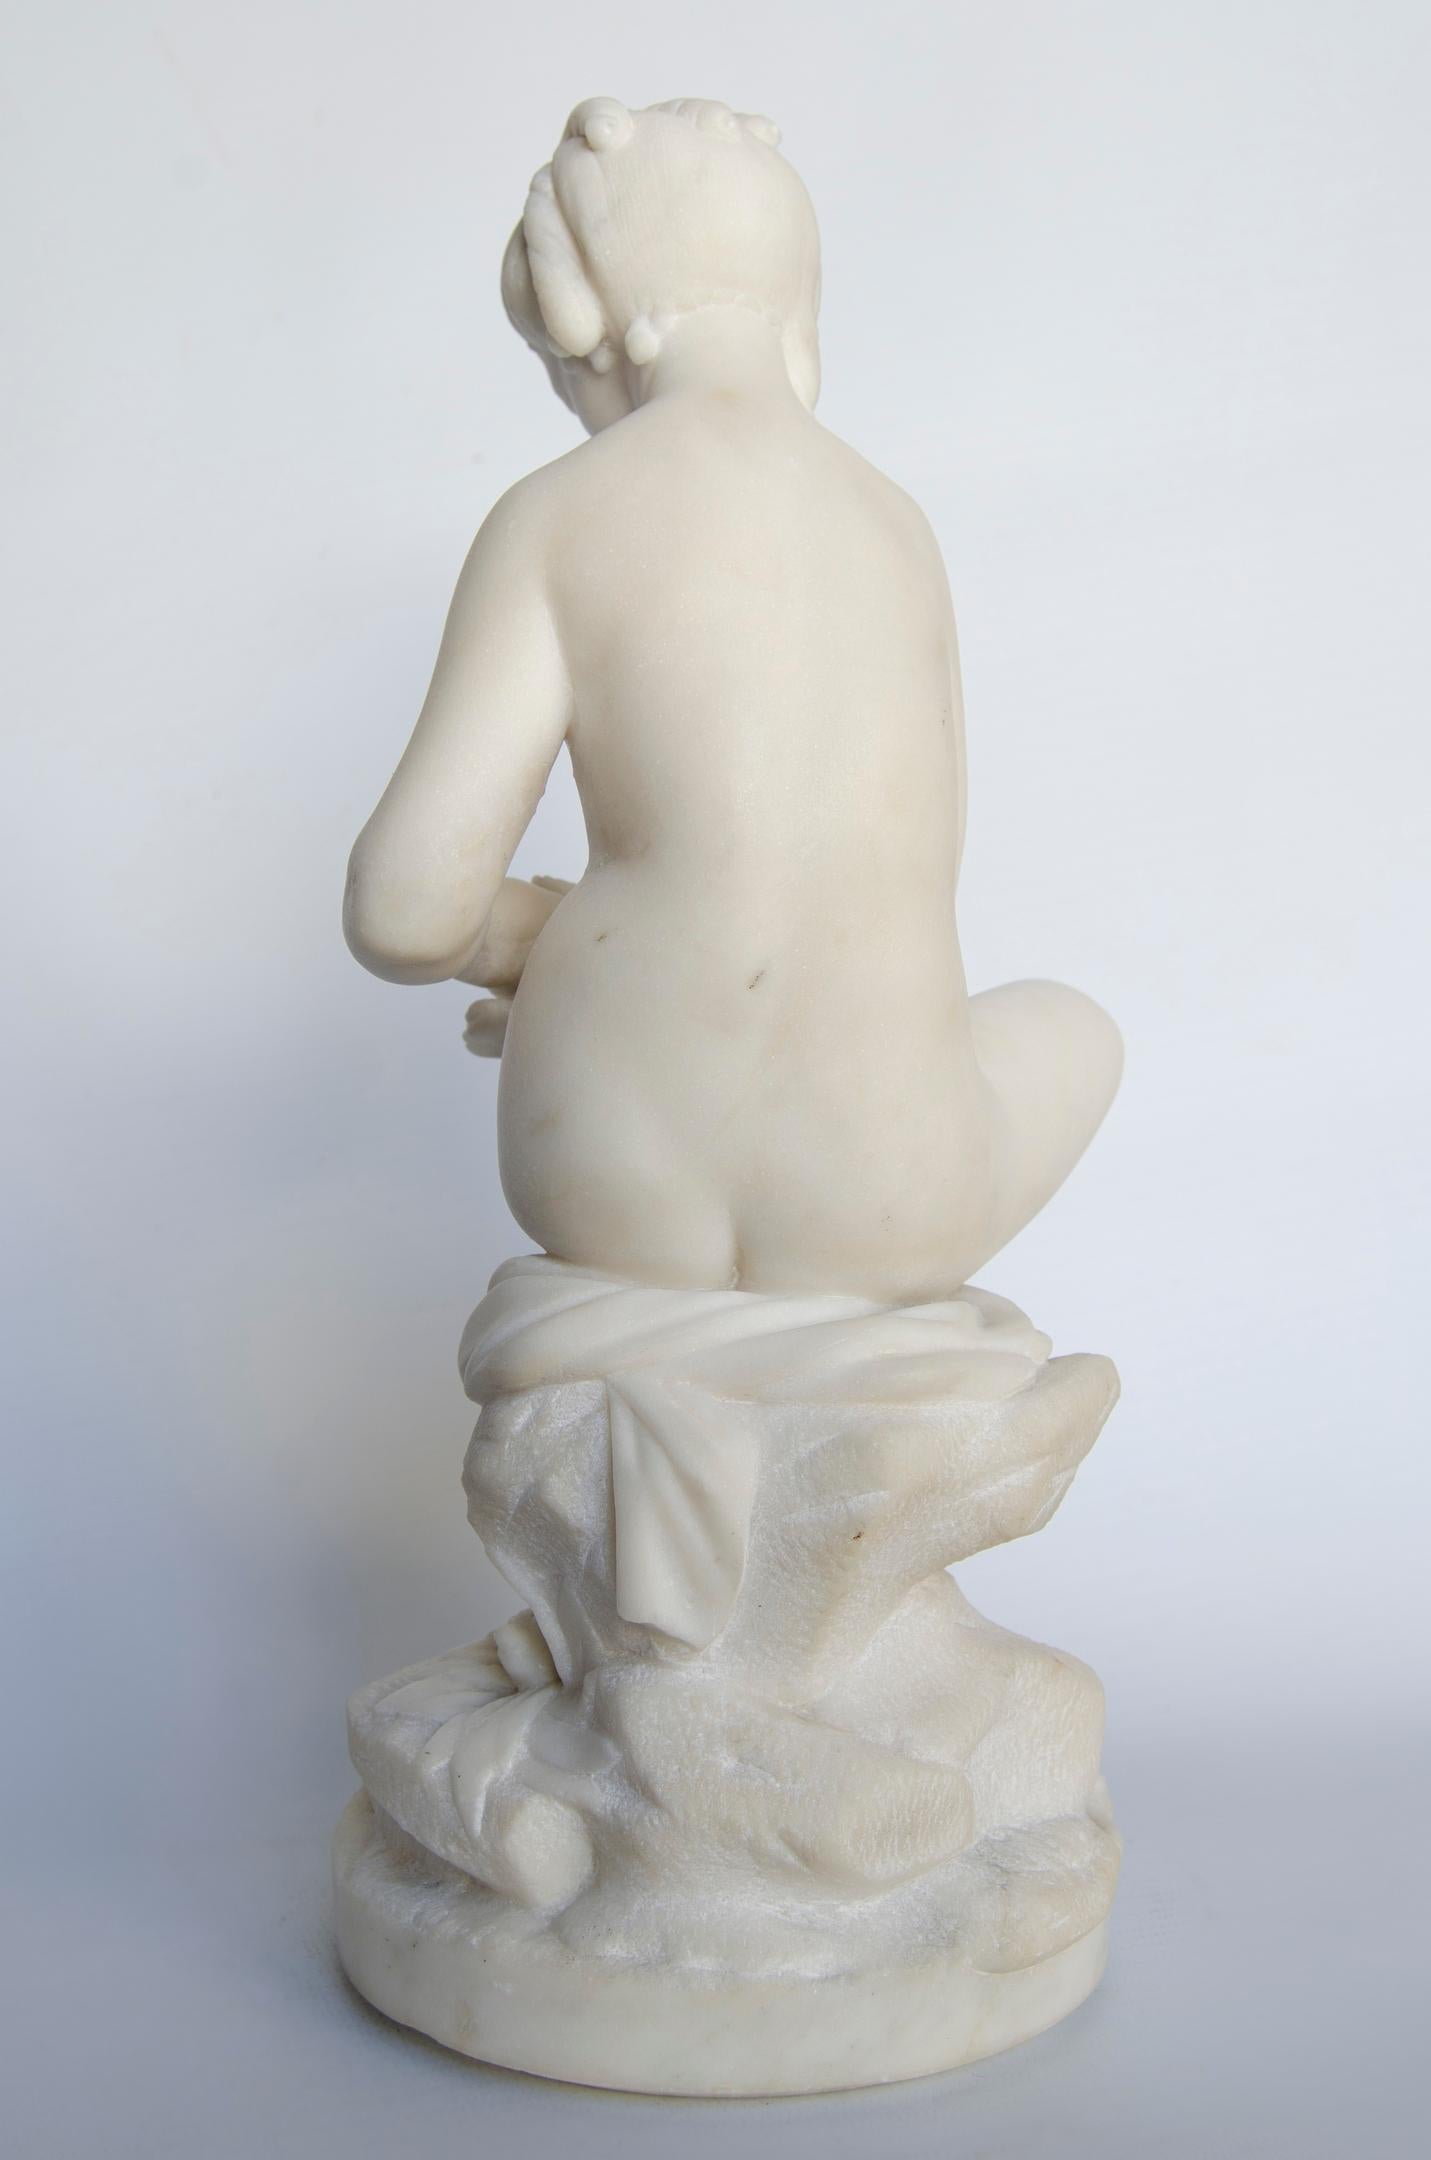 Neoclassical Sculpture 'Diana the huntress' Marble